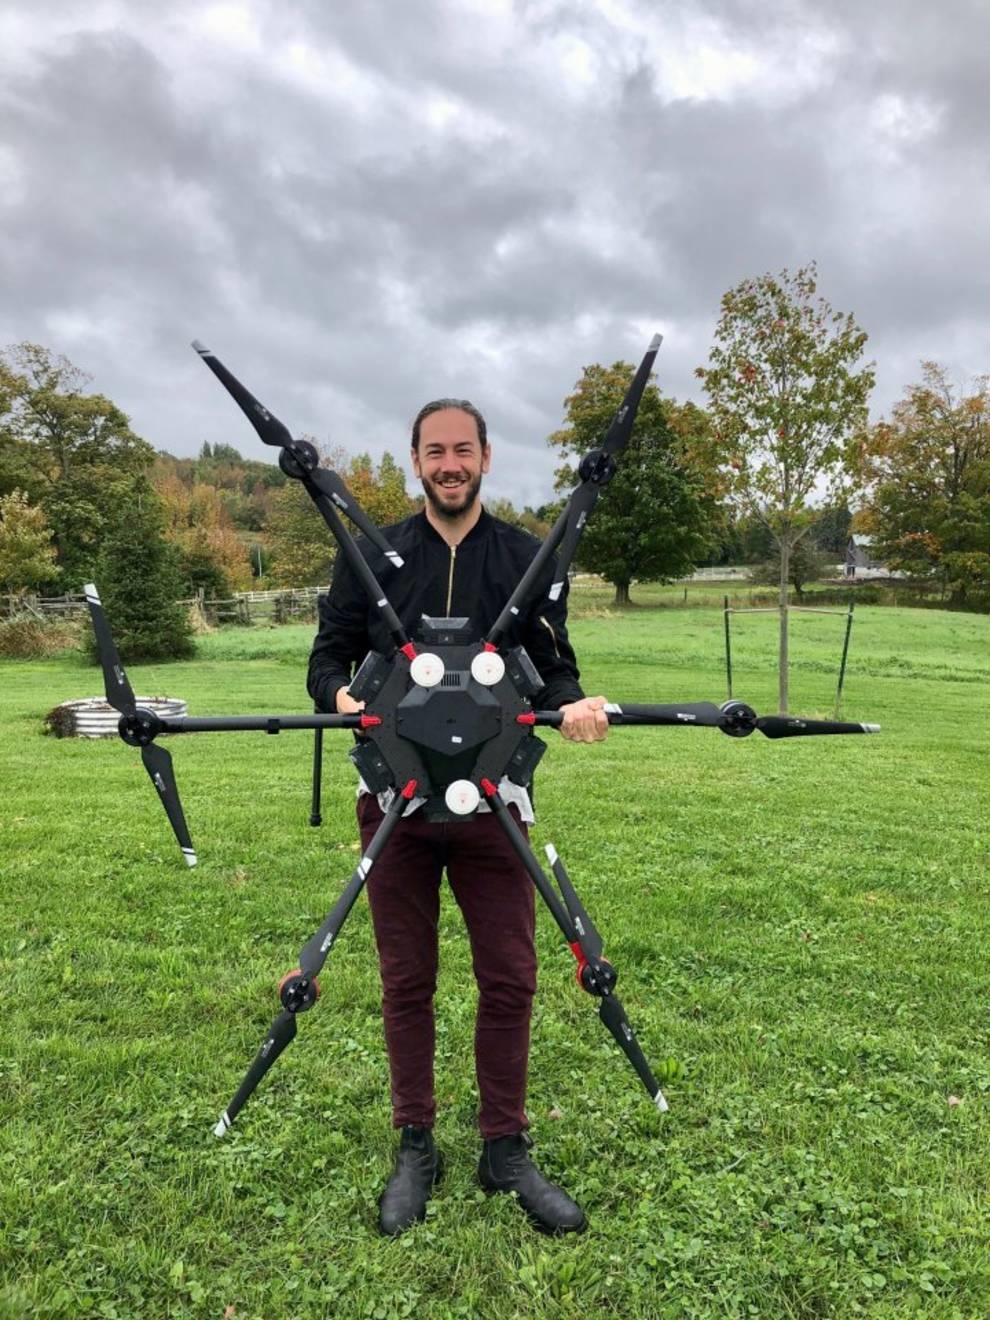 Drones will plant more than 1 billion trees by 2028